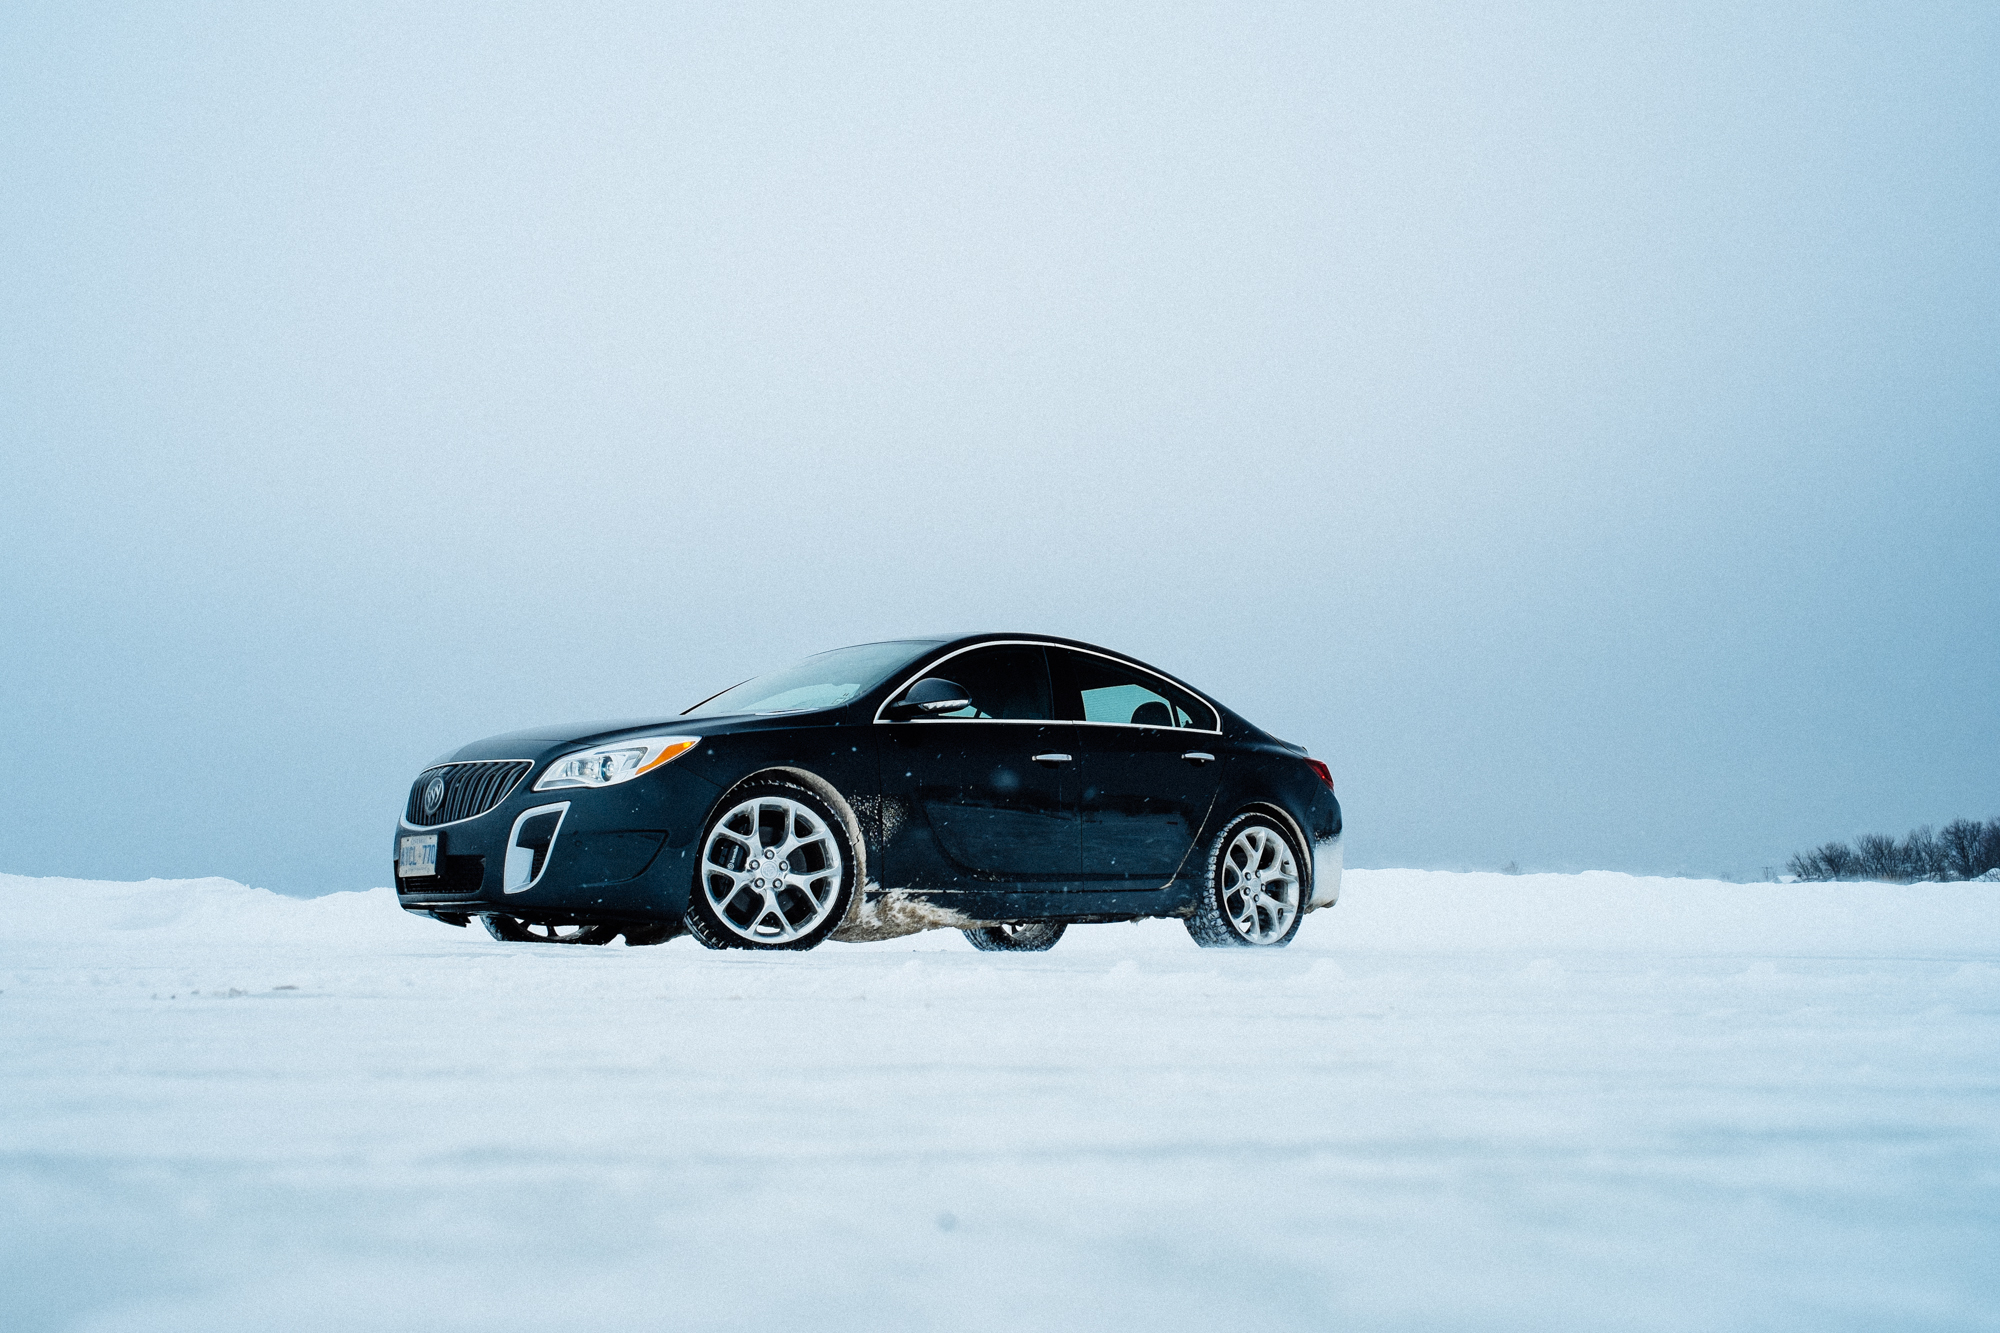 Auto Review: 2014 Buick Regal finds its place in the snow